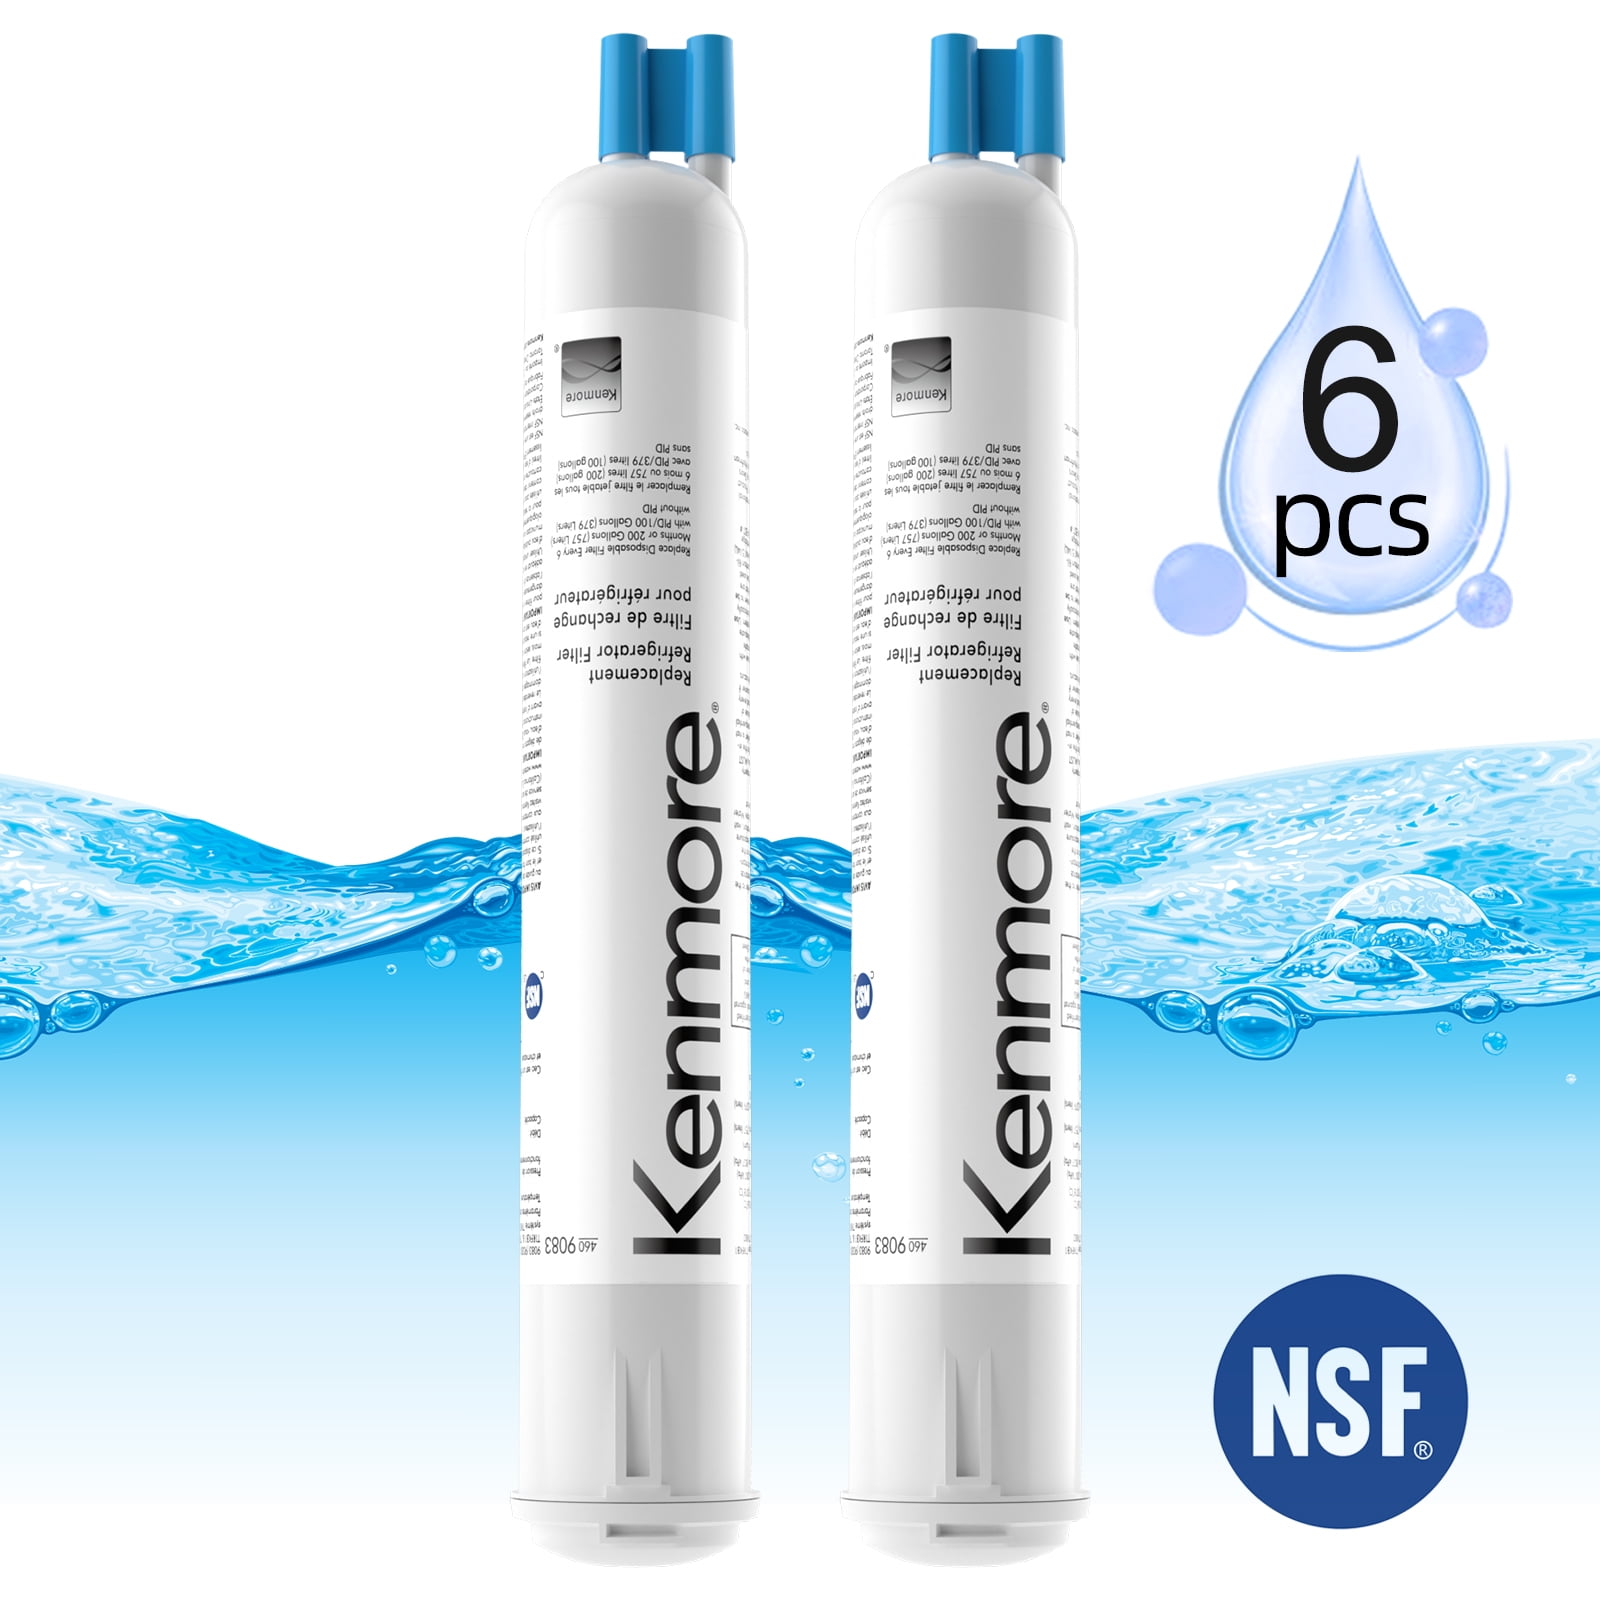 2PACK  Fit for Kenmore 9083 4609083 9020 9030 Refrigerator Water Filter